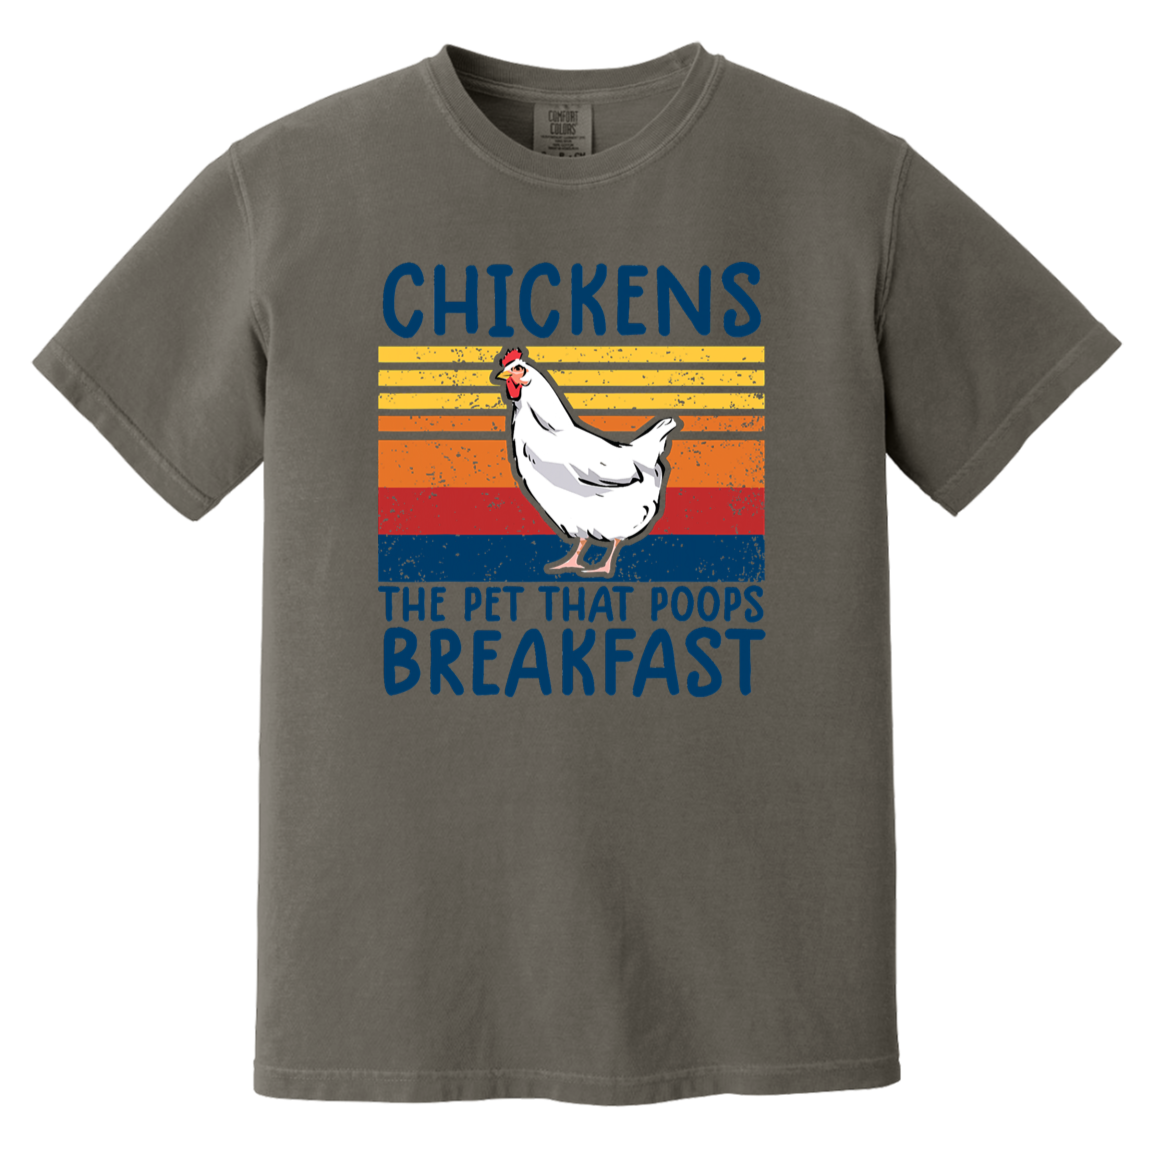 Chickens The Pet That Heavyweight Garment-Dyed T-Shirt